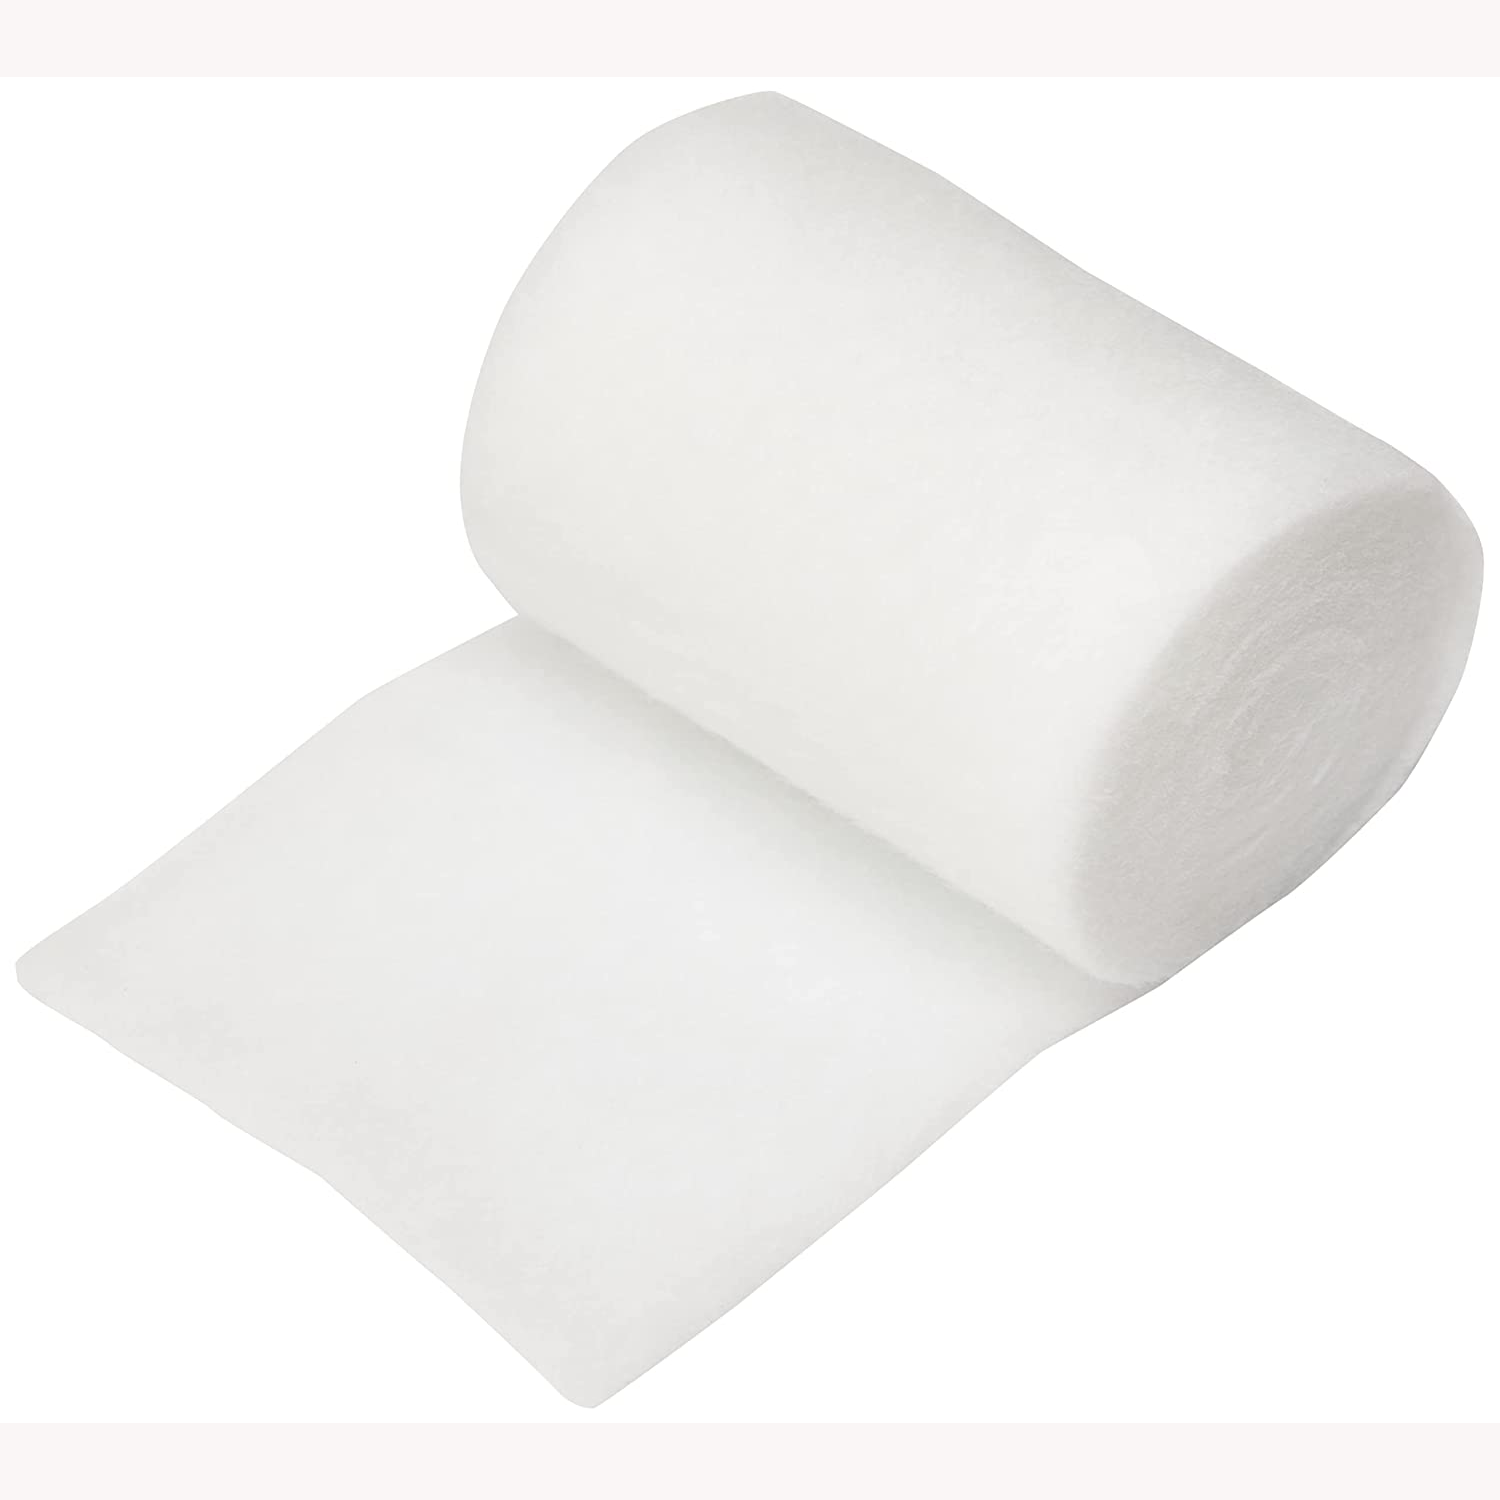 Soffban Plus Synthetic Dresssing | 15cm x 2.7m | Pack of 12 (2)